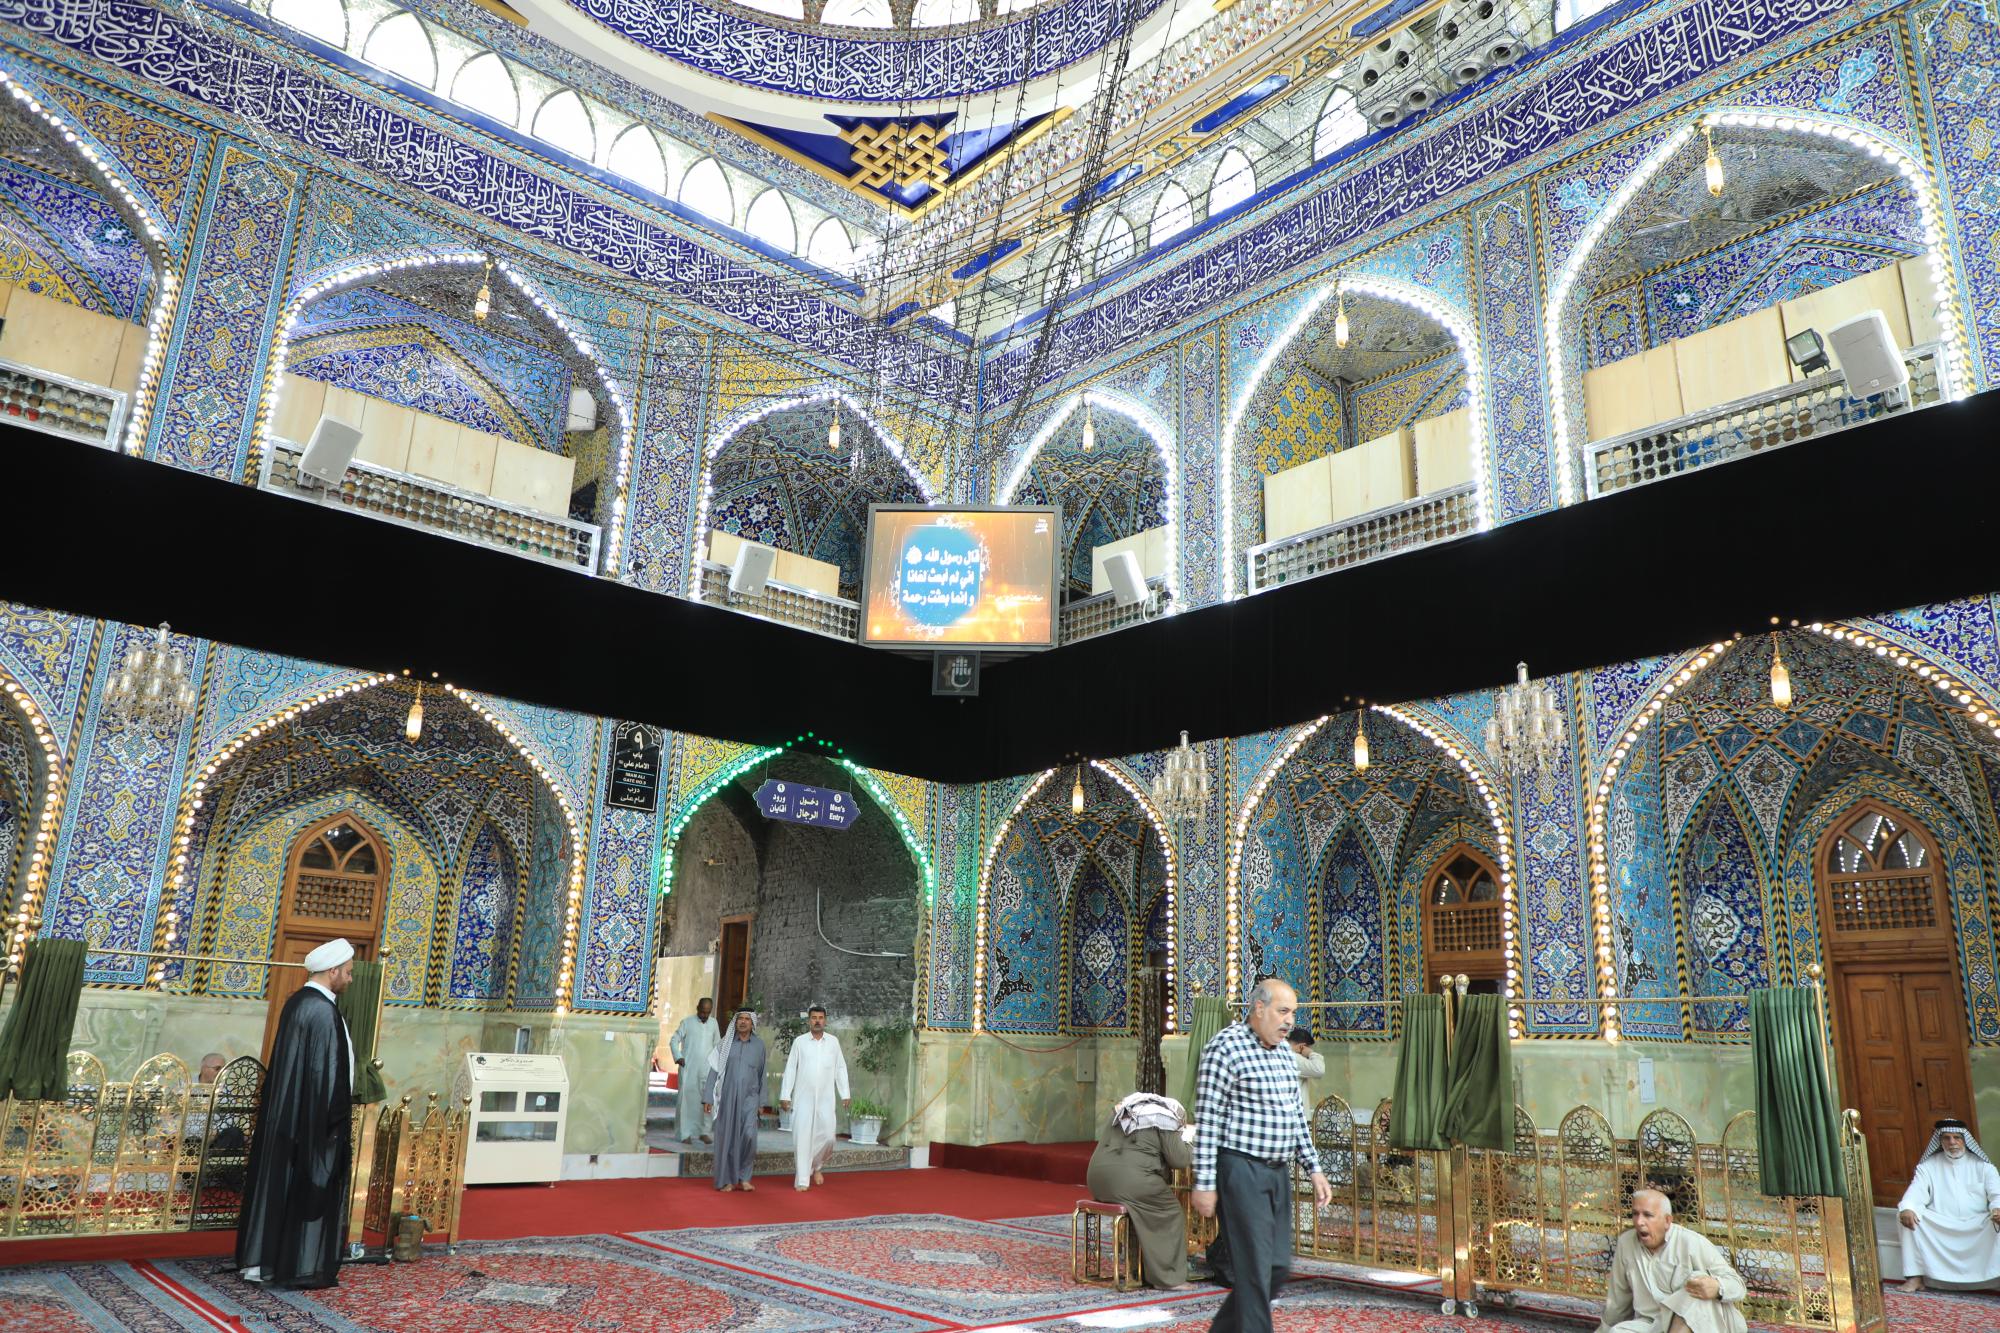 Al-Abbas Shrine covered with black on anniversary of demolition of graves of Imams of Baqi